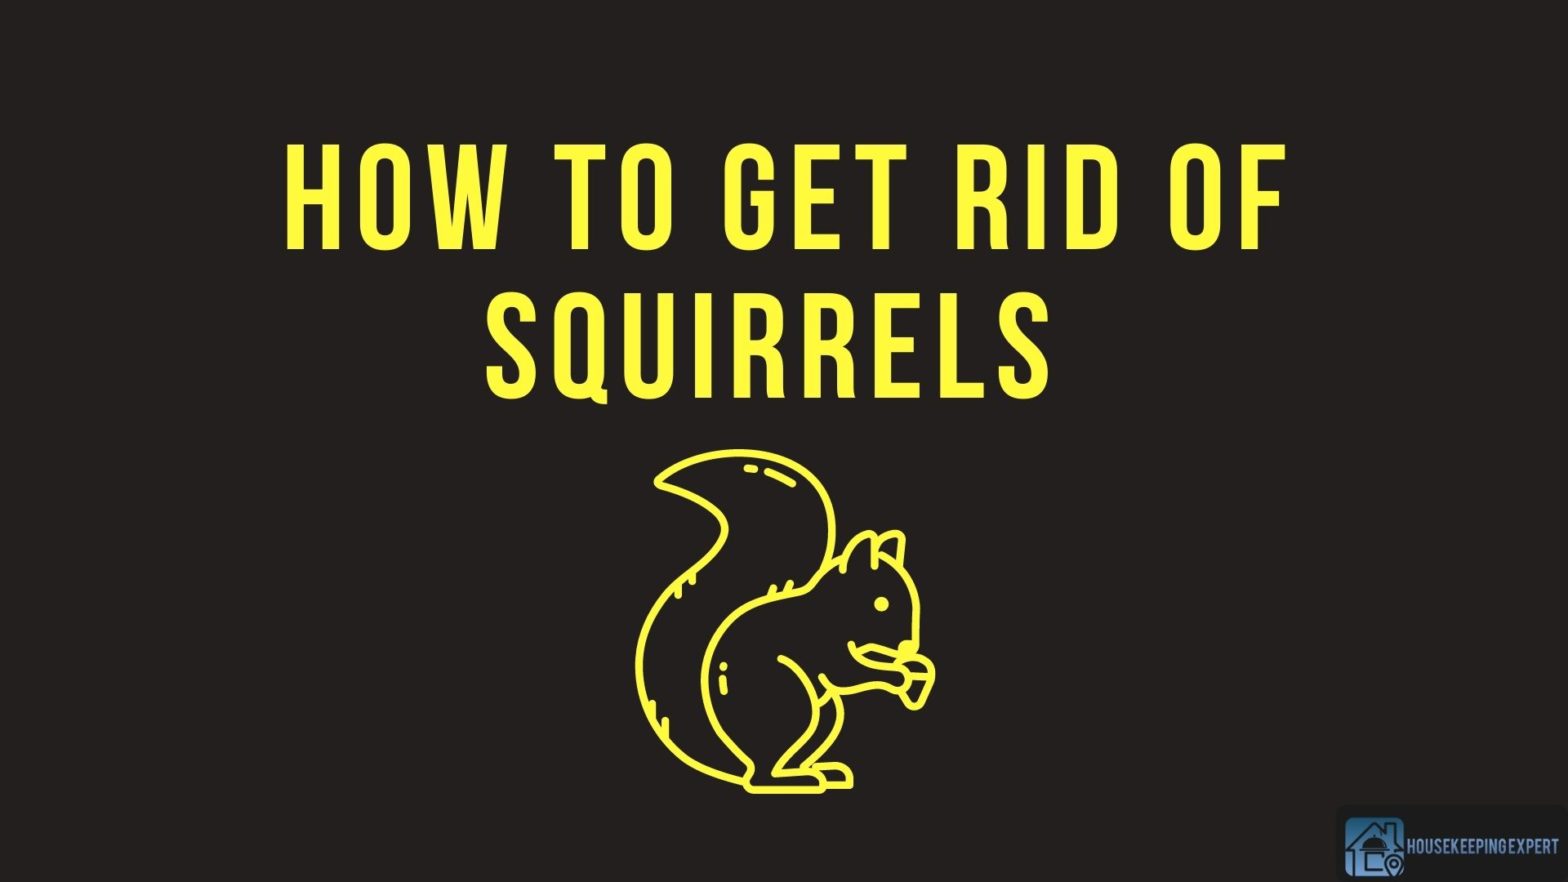 How To Get Rid Of Squirrels